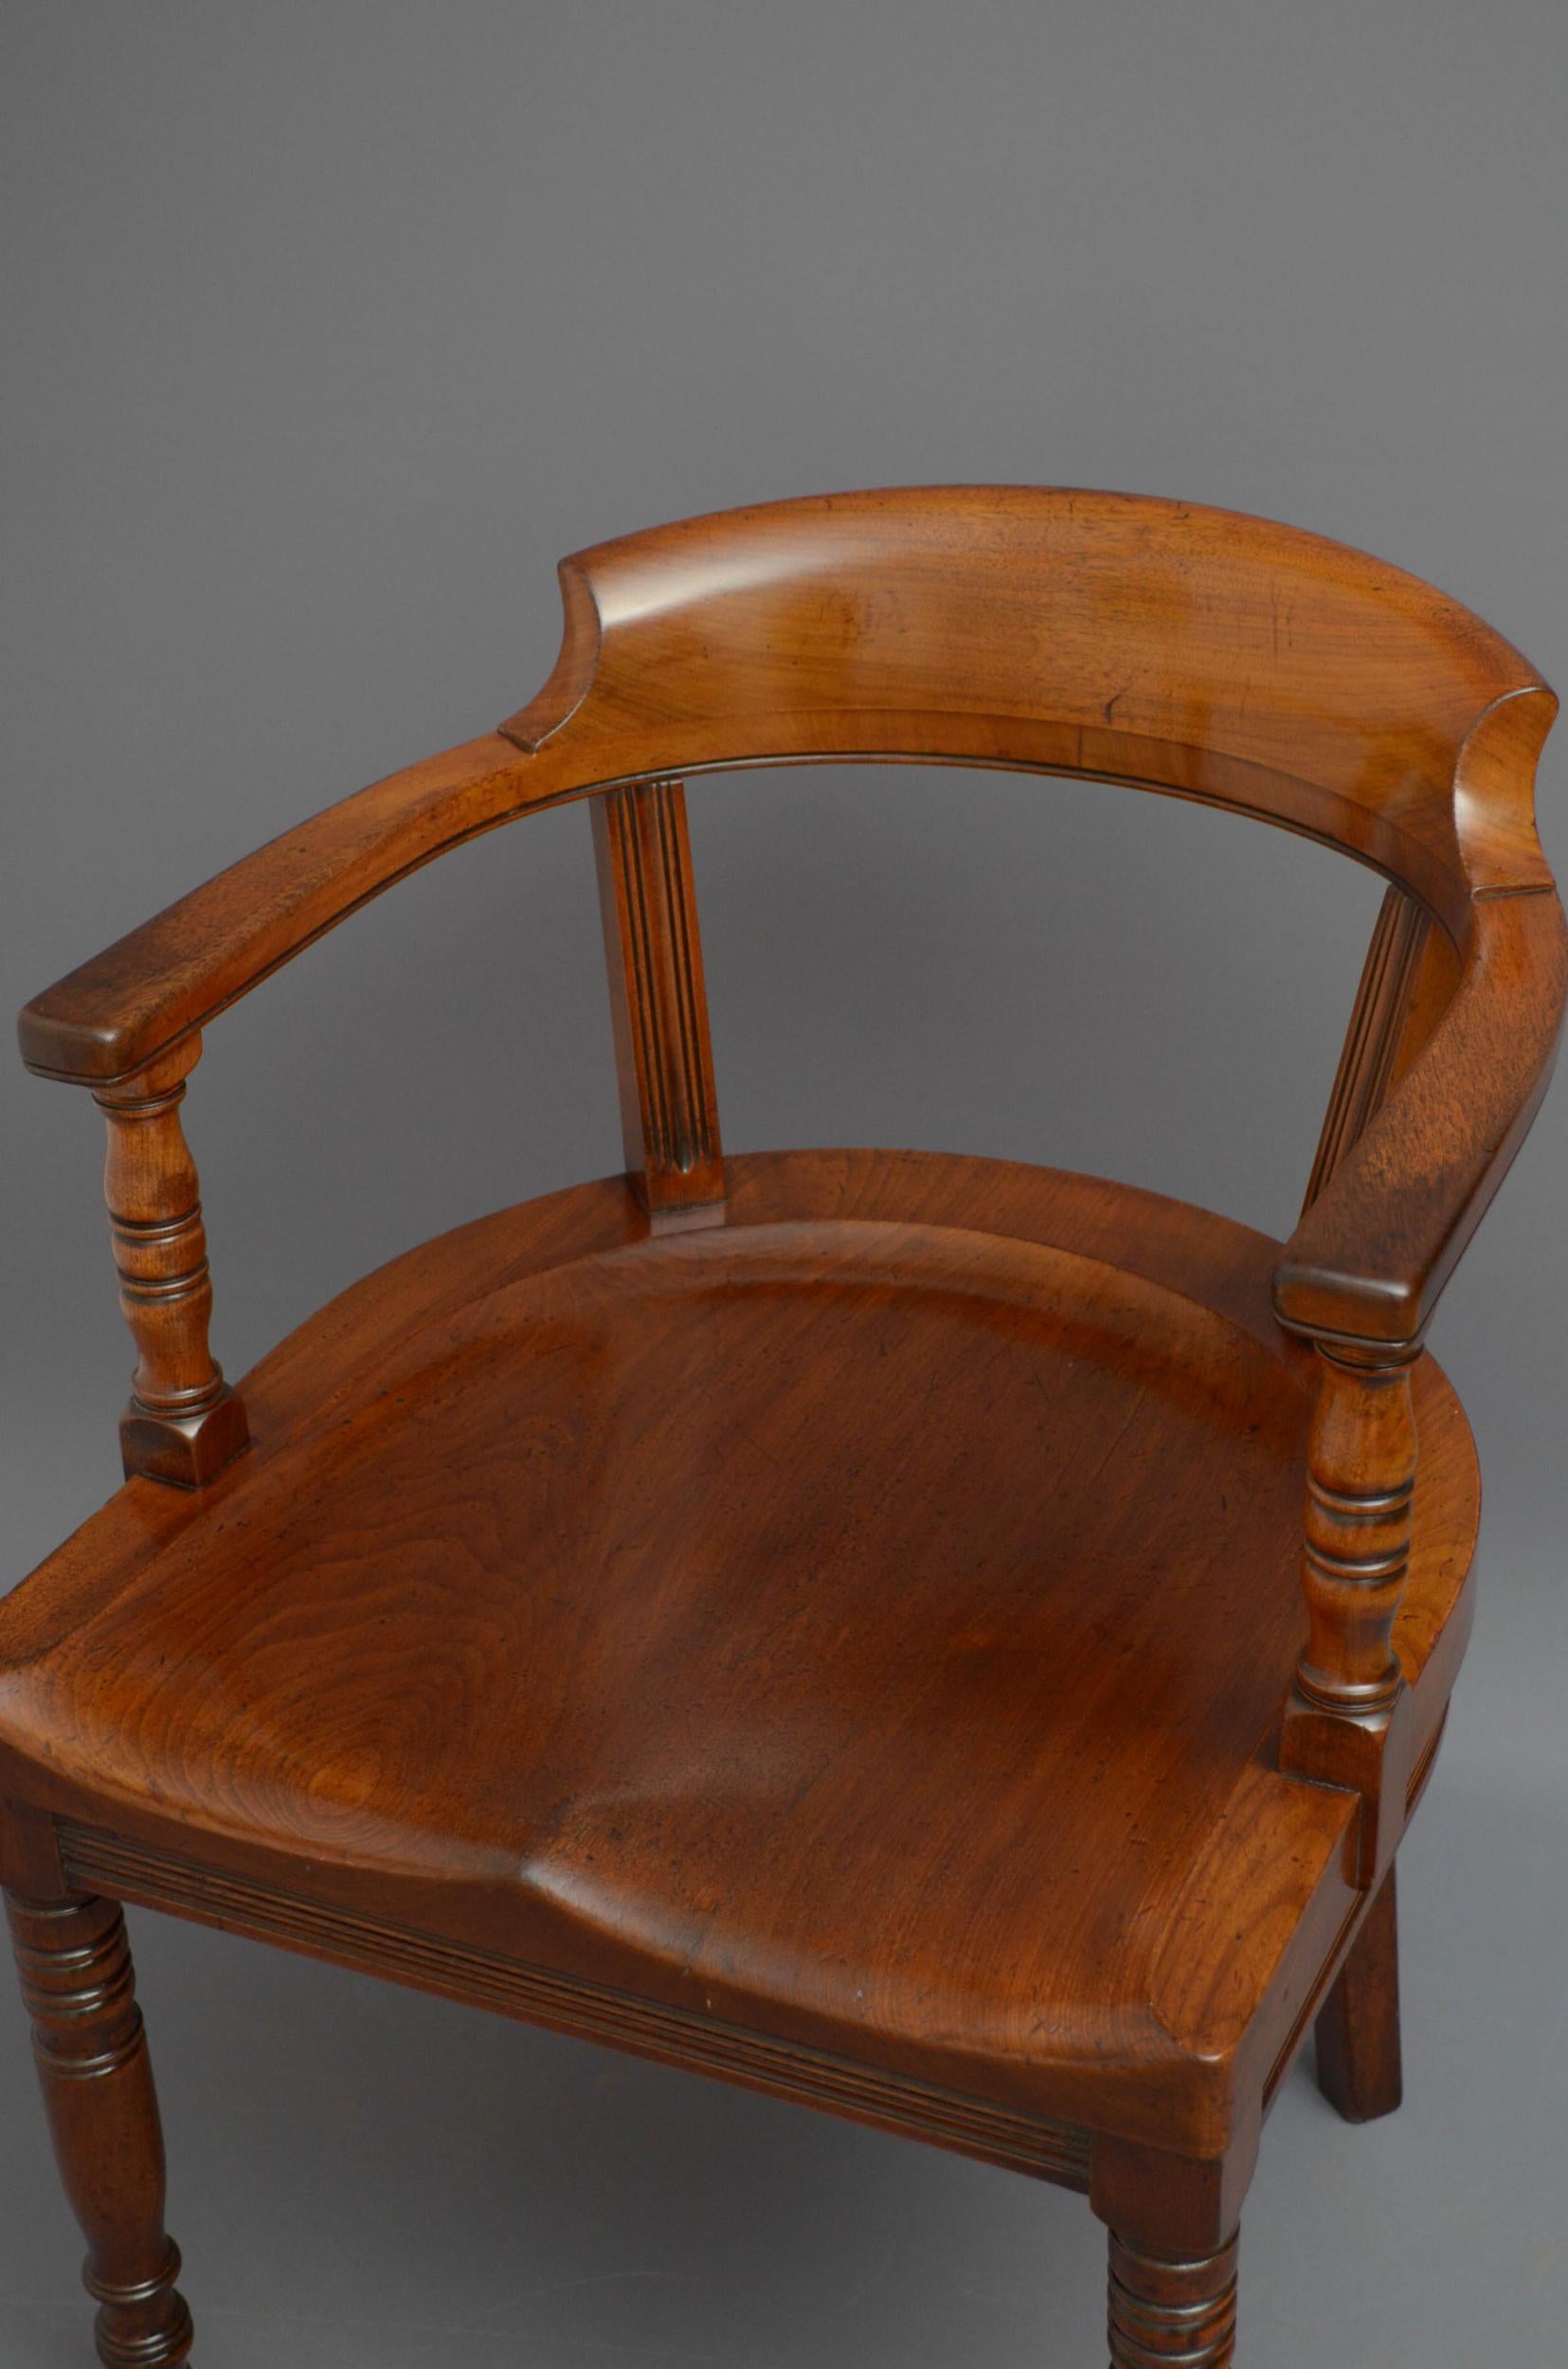 Sn5055, substantial late Victorian walnut office chair, having shaped top rail with reeded supports, open arms and generous seat with reeded front and side rail, standing on turned and ringed legs terminating in original brass castors. Stamped